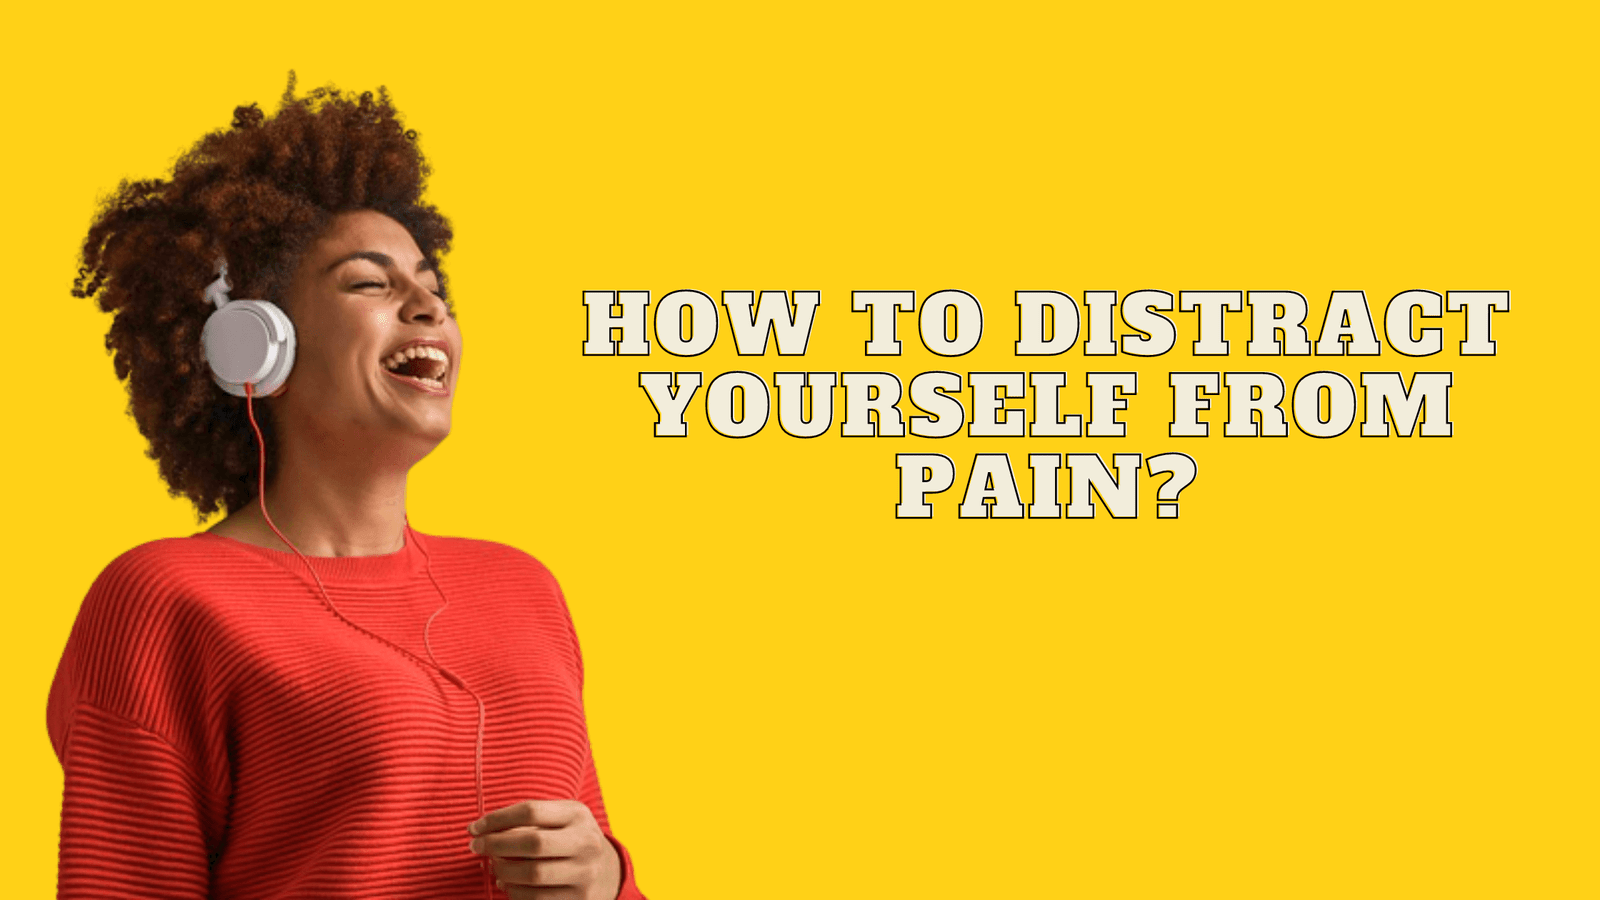 How To Distract Yourself From Pain